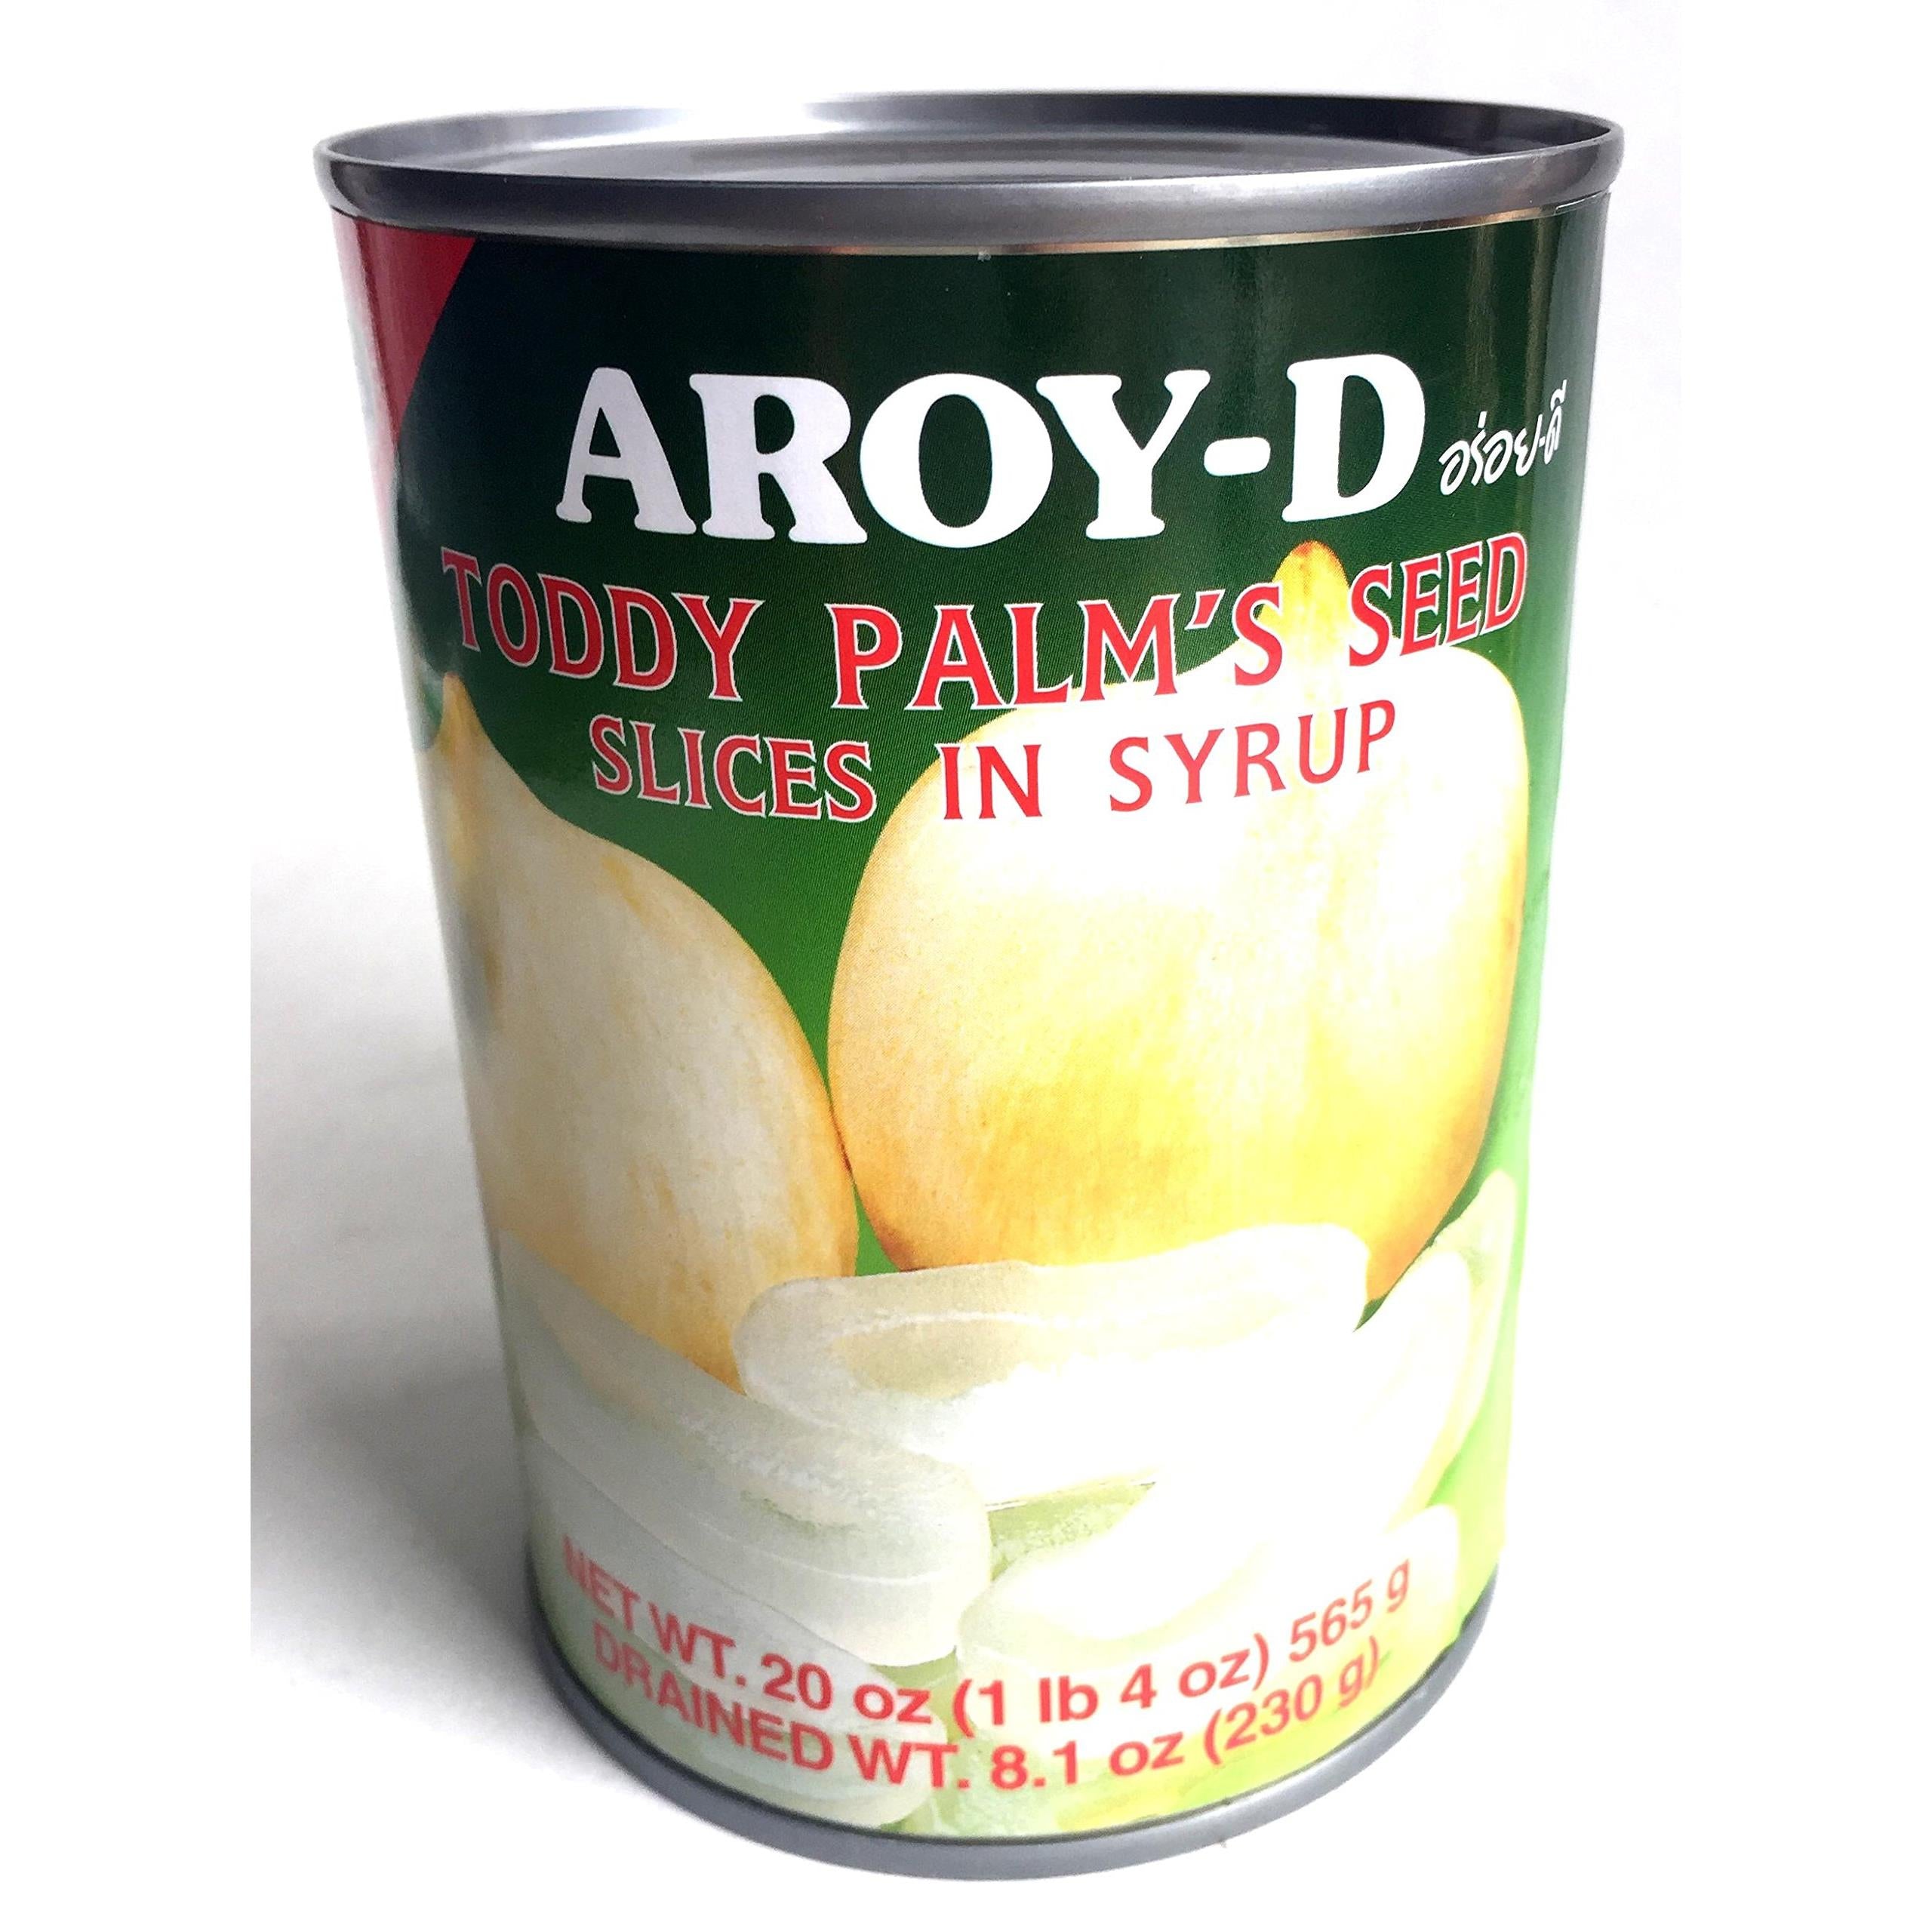 Fruits in Syrup (Sliced Toddy Palm Seed) 20oz (Pack of 6)